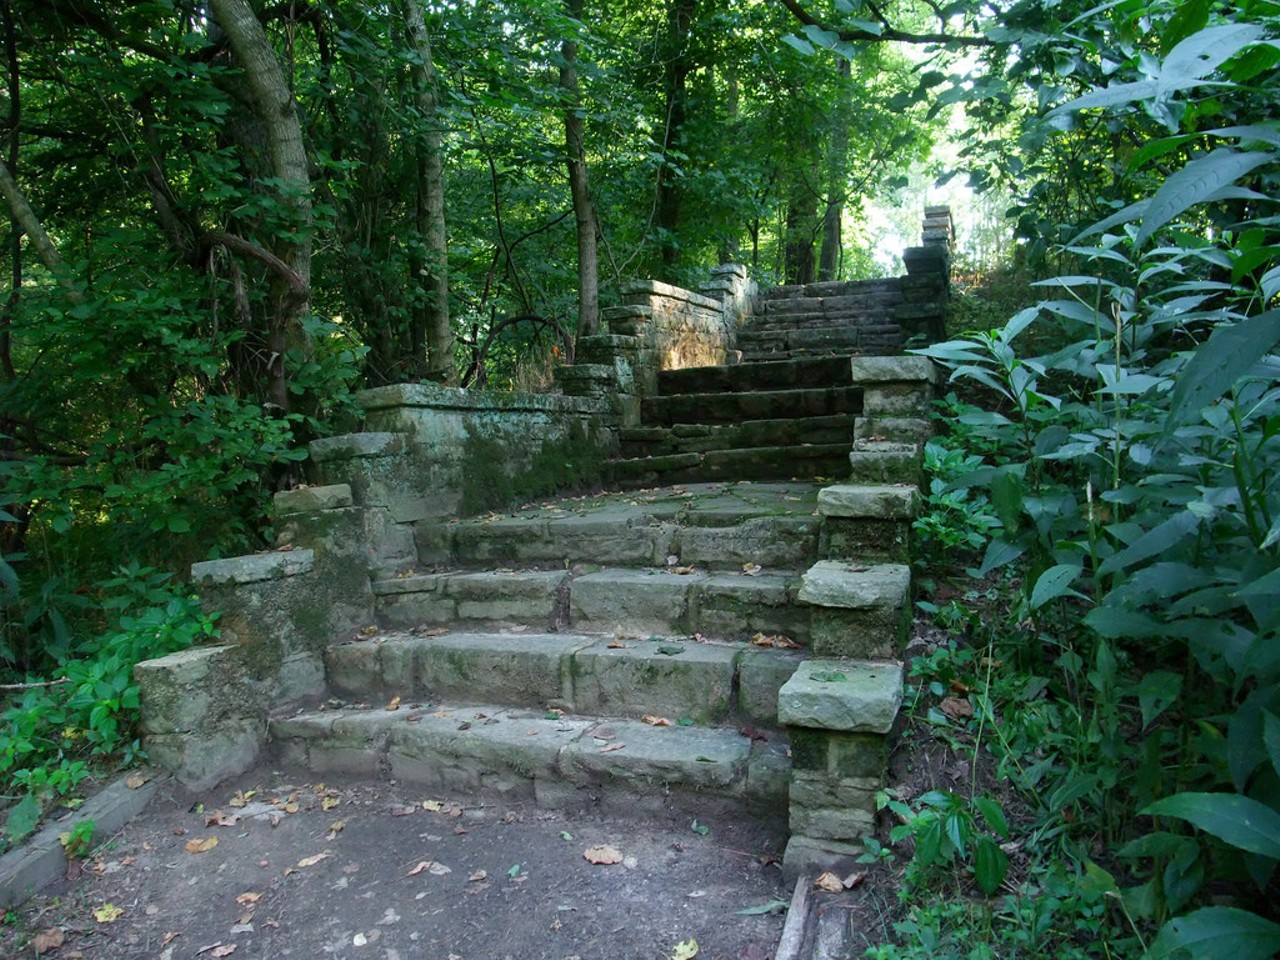 If hiking is more your style, Meramec River State Park has that, too. You'll be able to tread more than 13 miles of trails and see everything from caves to wooded areas to bluffs.